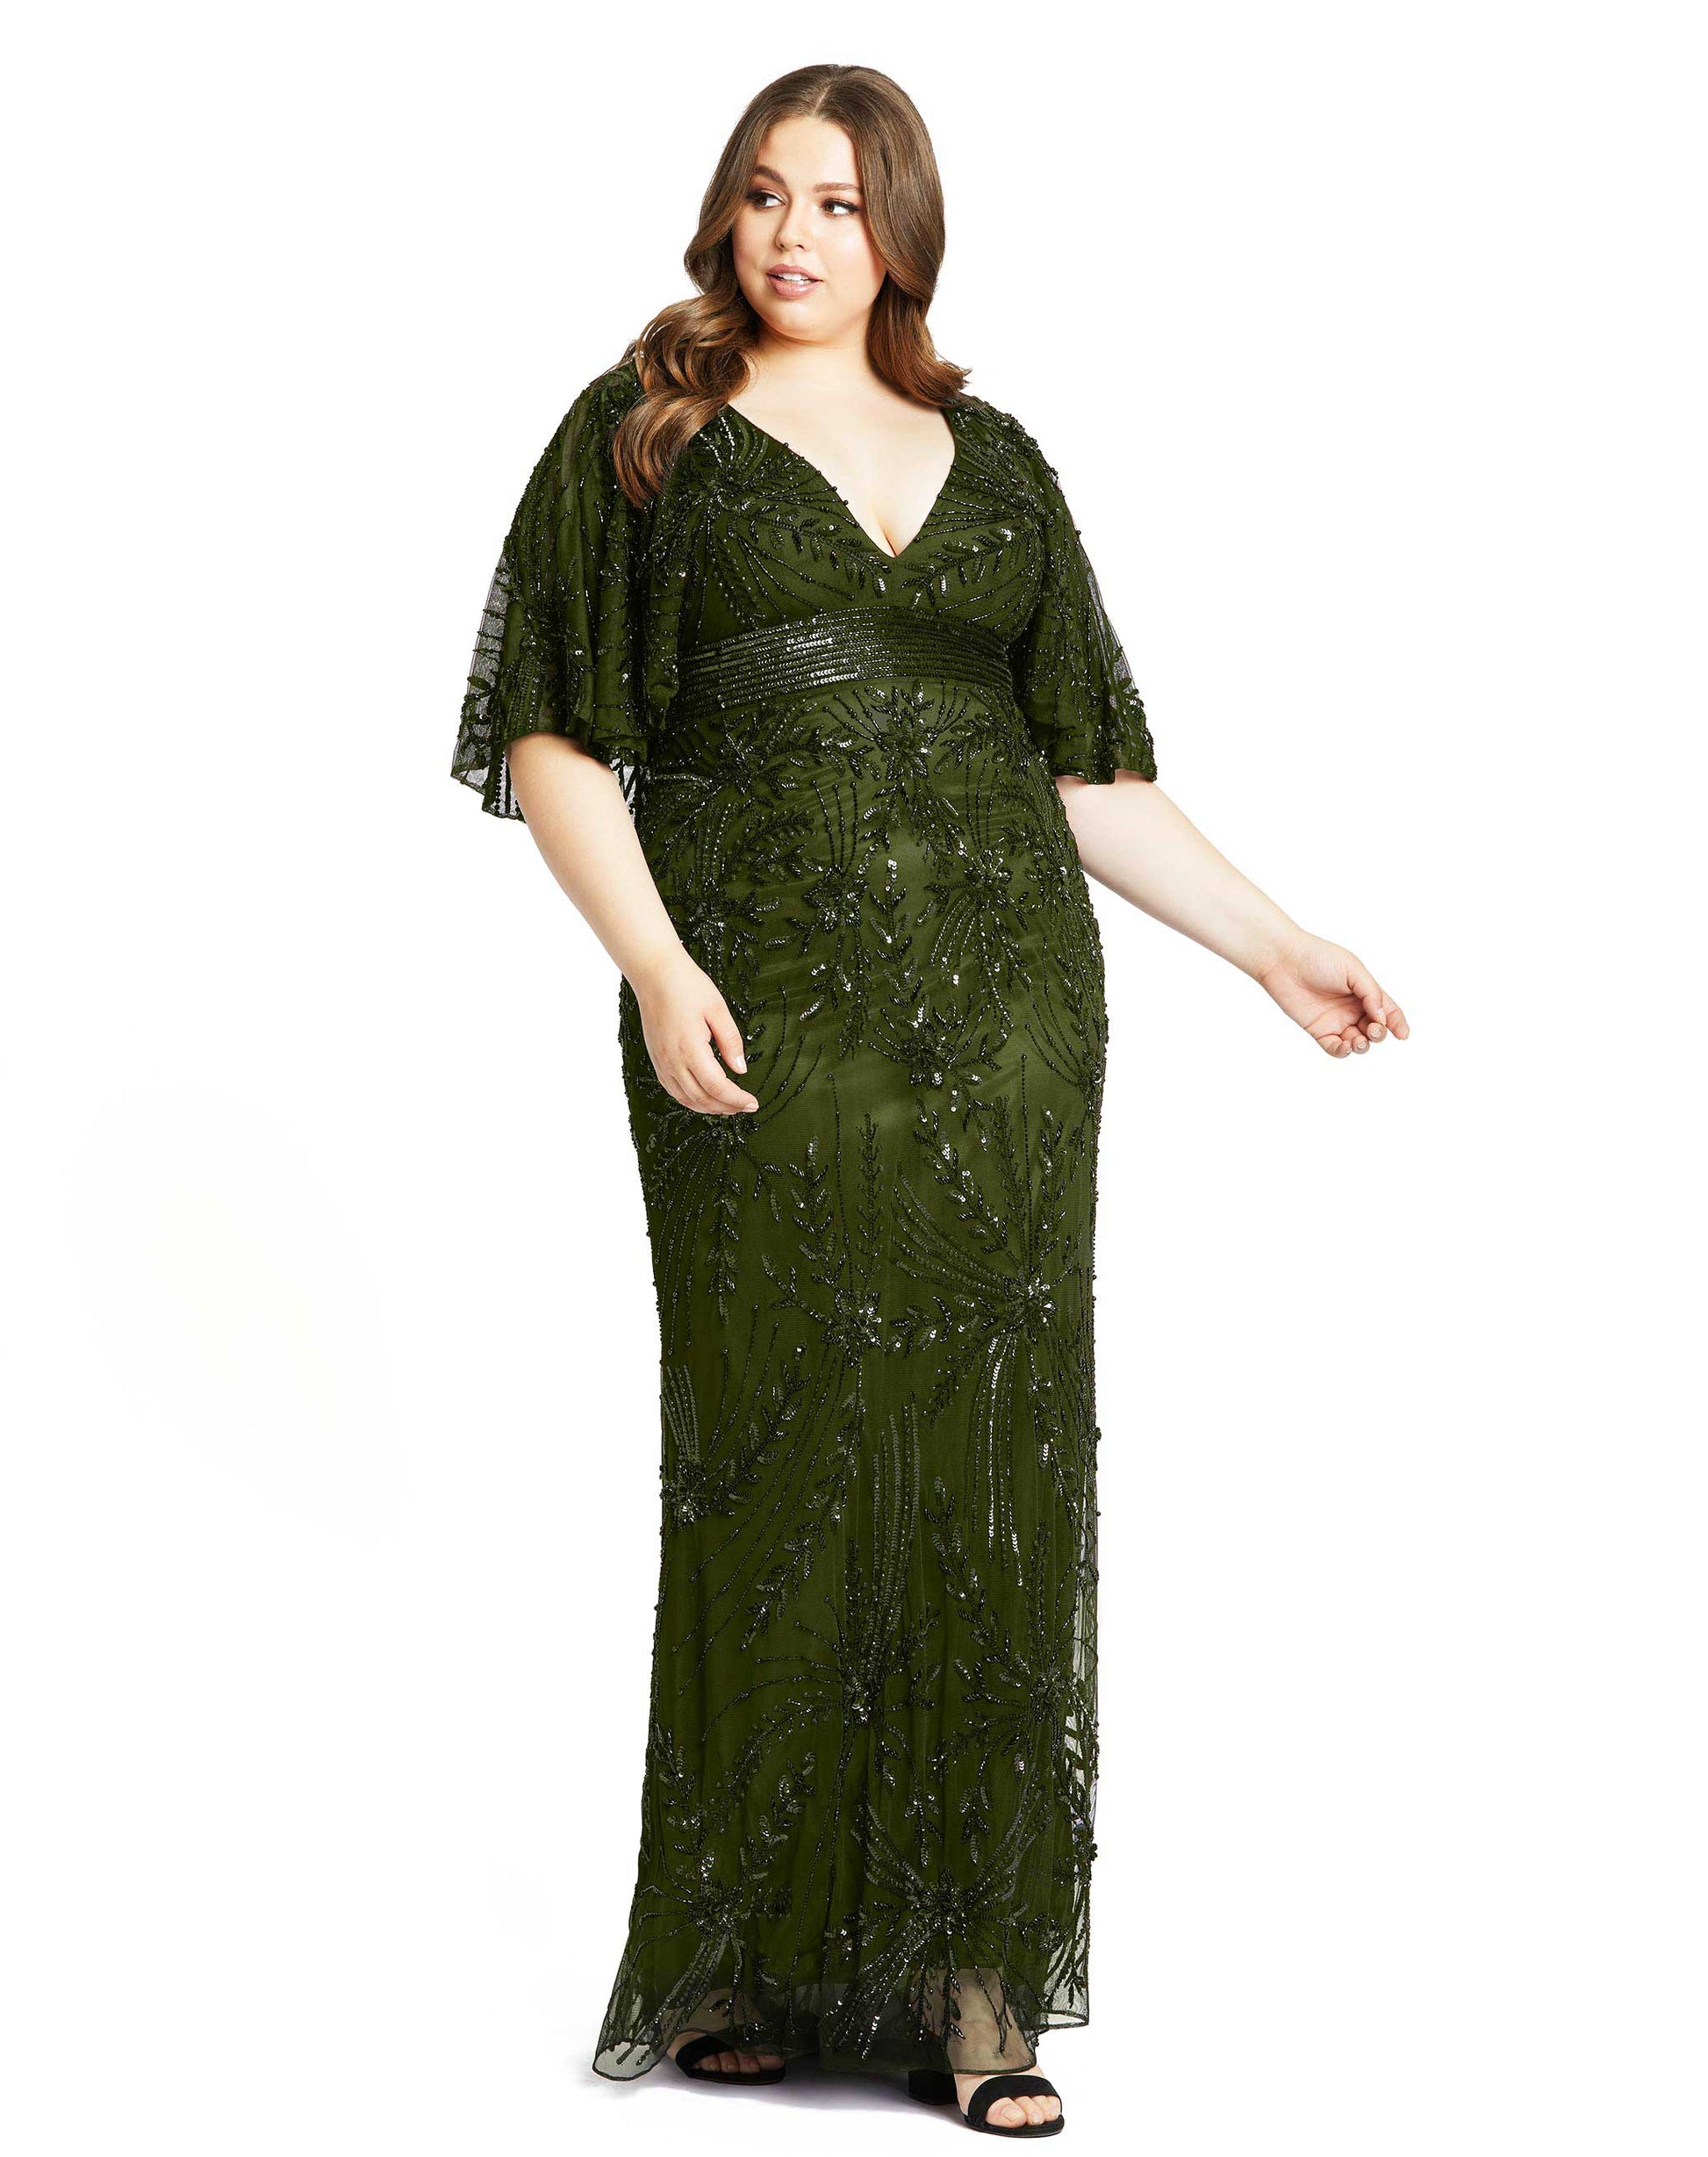 Vintage-inspired evening gown with flounce sleeves, intricate sequin detailing and sequined empire waist. Mac Duggal Fully Lined Back Zipper 100% Polyester Short Sleeve Full Length Plunging Neckline Style #5335